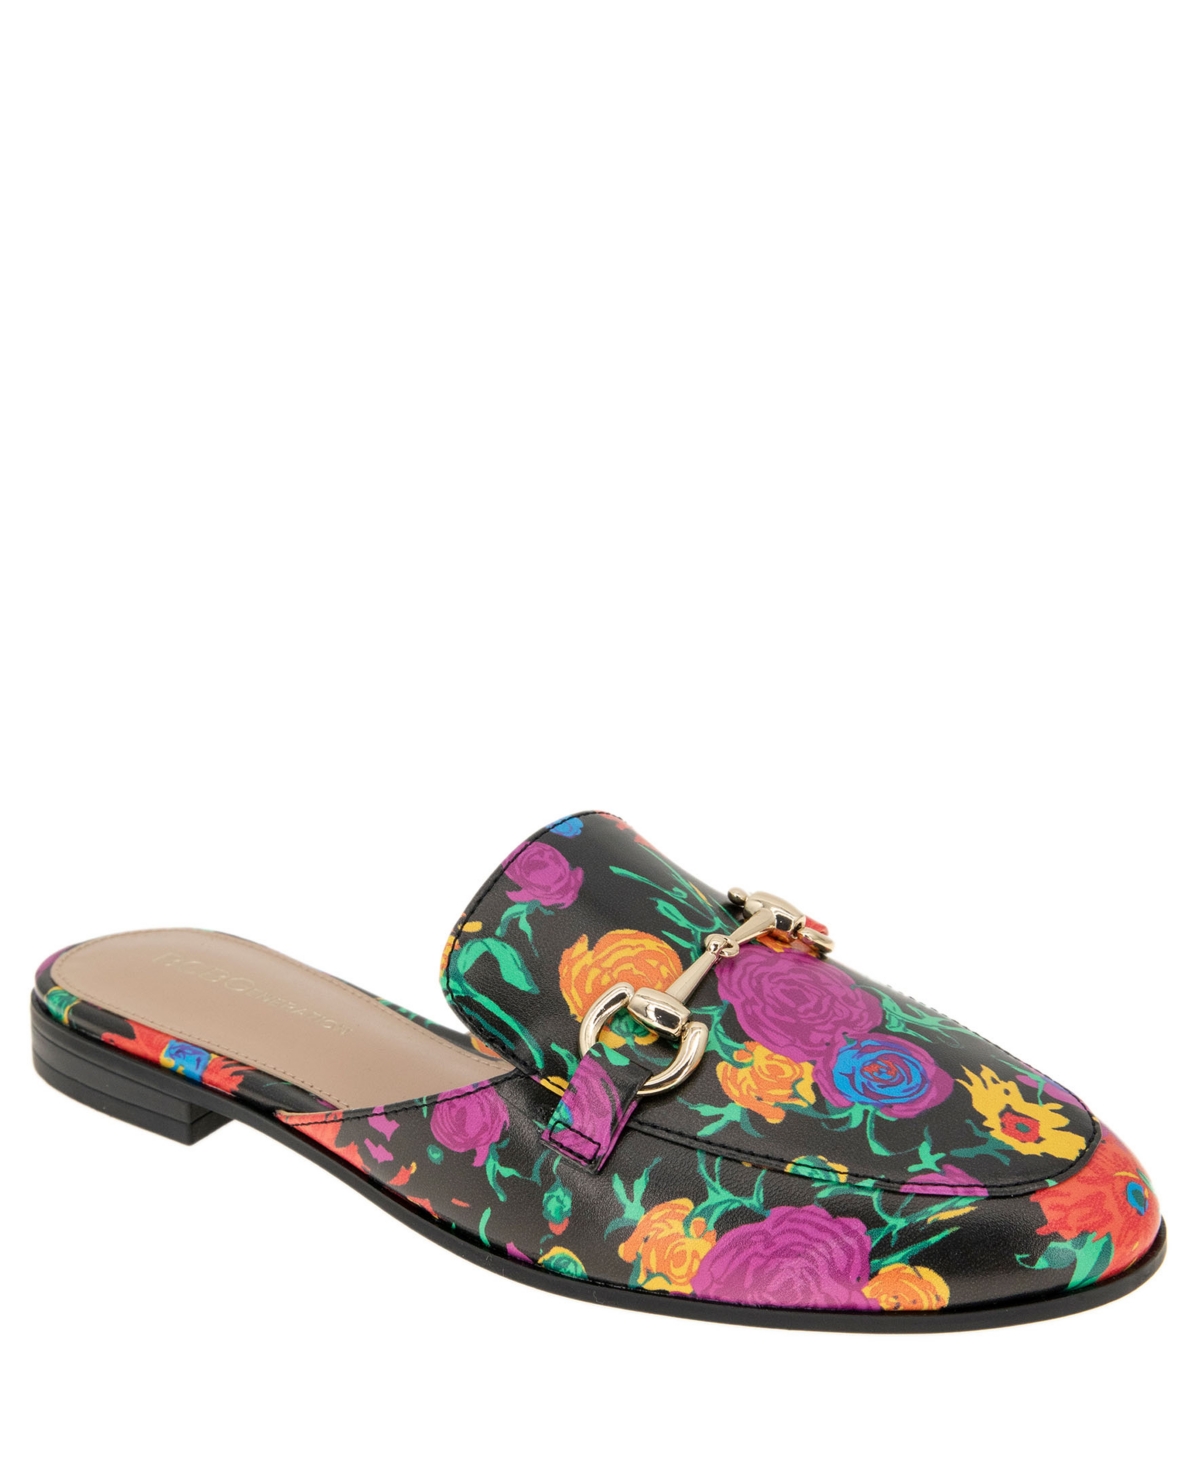 Women's Zorie Tailored Slip-On Loafer Mules - Multi Floral